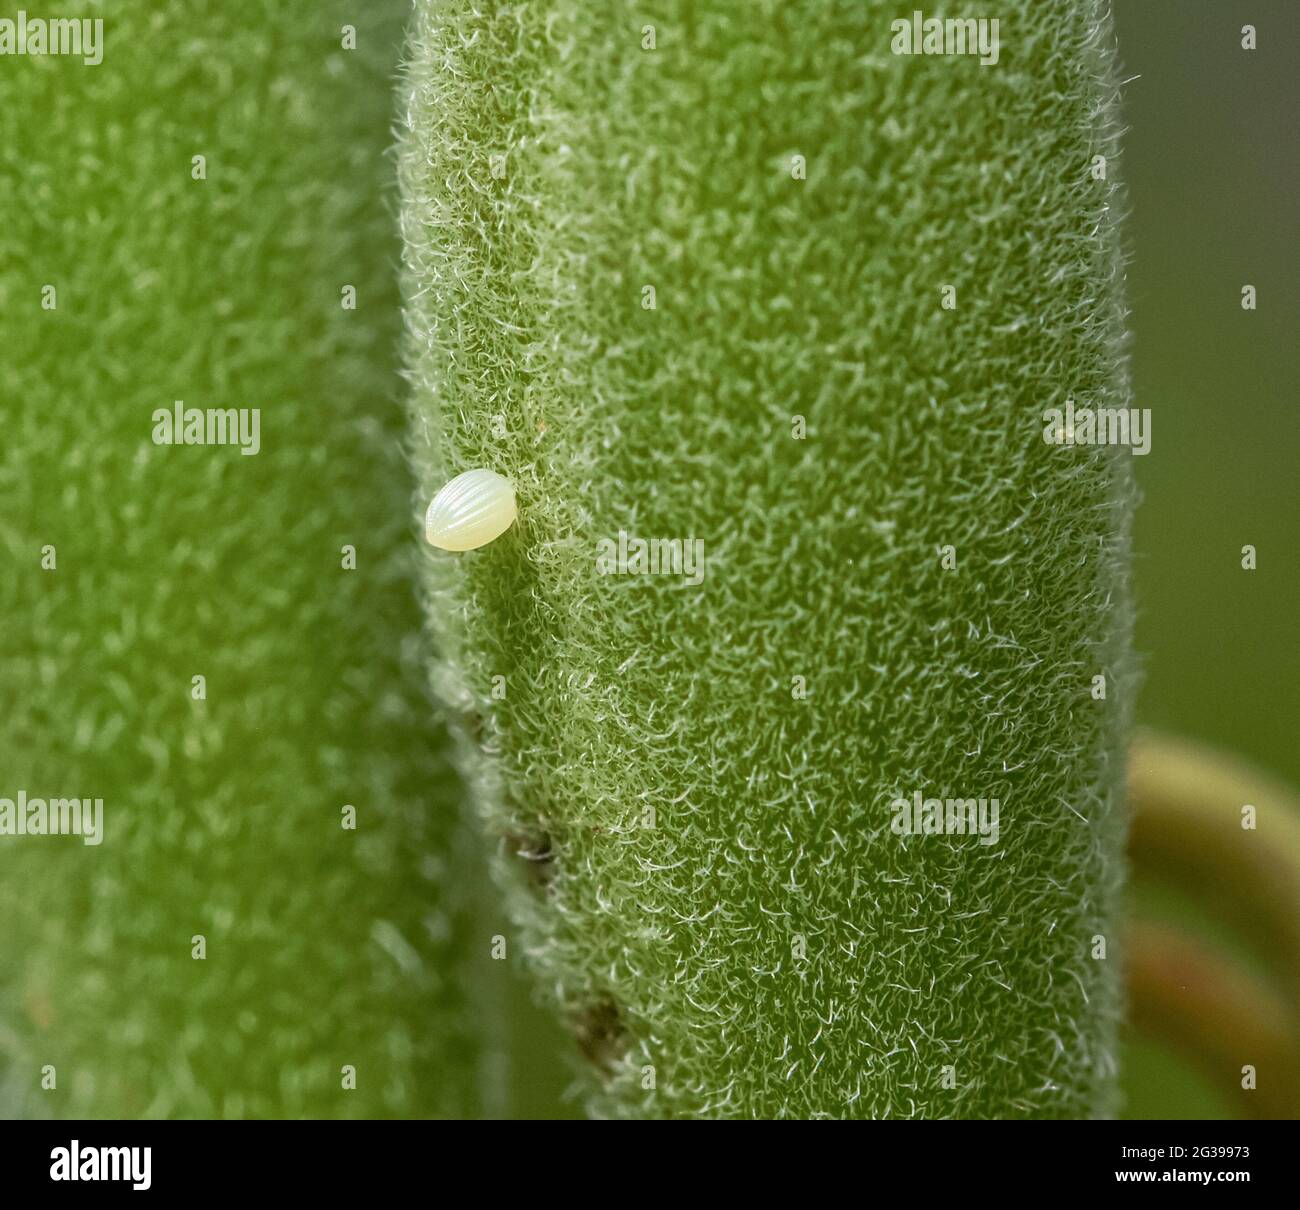 Closeup of a small translucent white Monarch egg (Danaus plexippus) deposited on a seed pod of Butterfly weed (Asclepias tuberosa.) Stock Photo